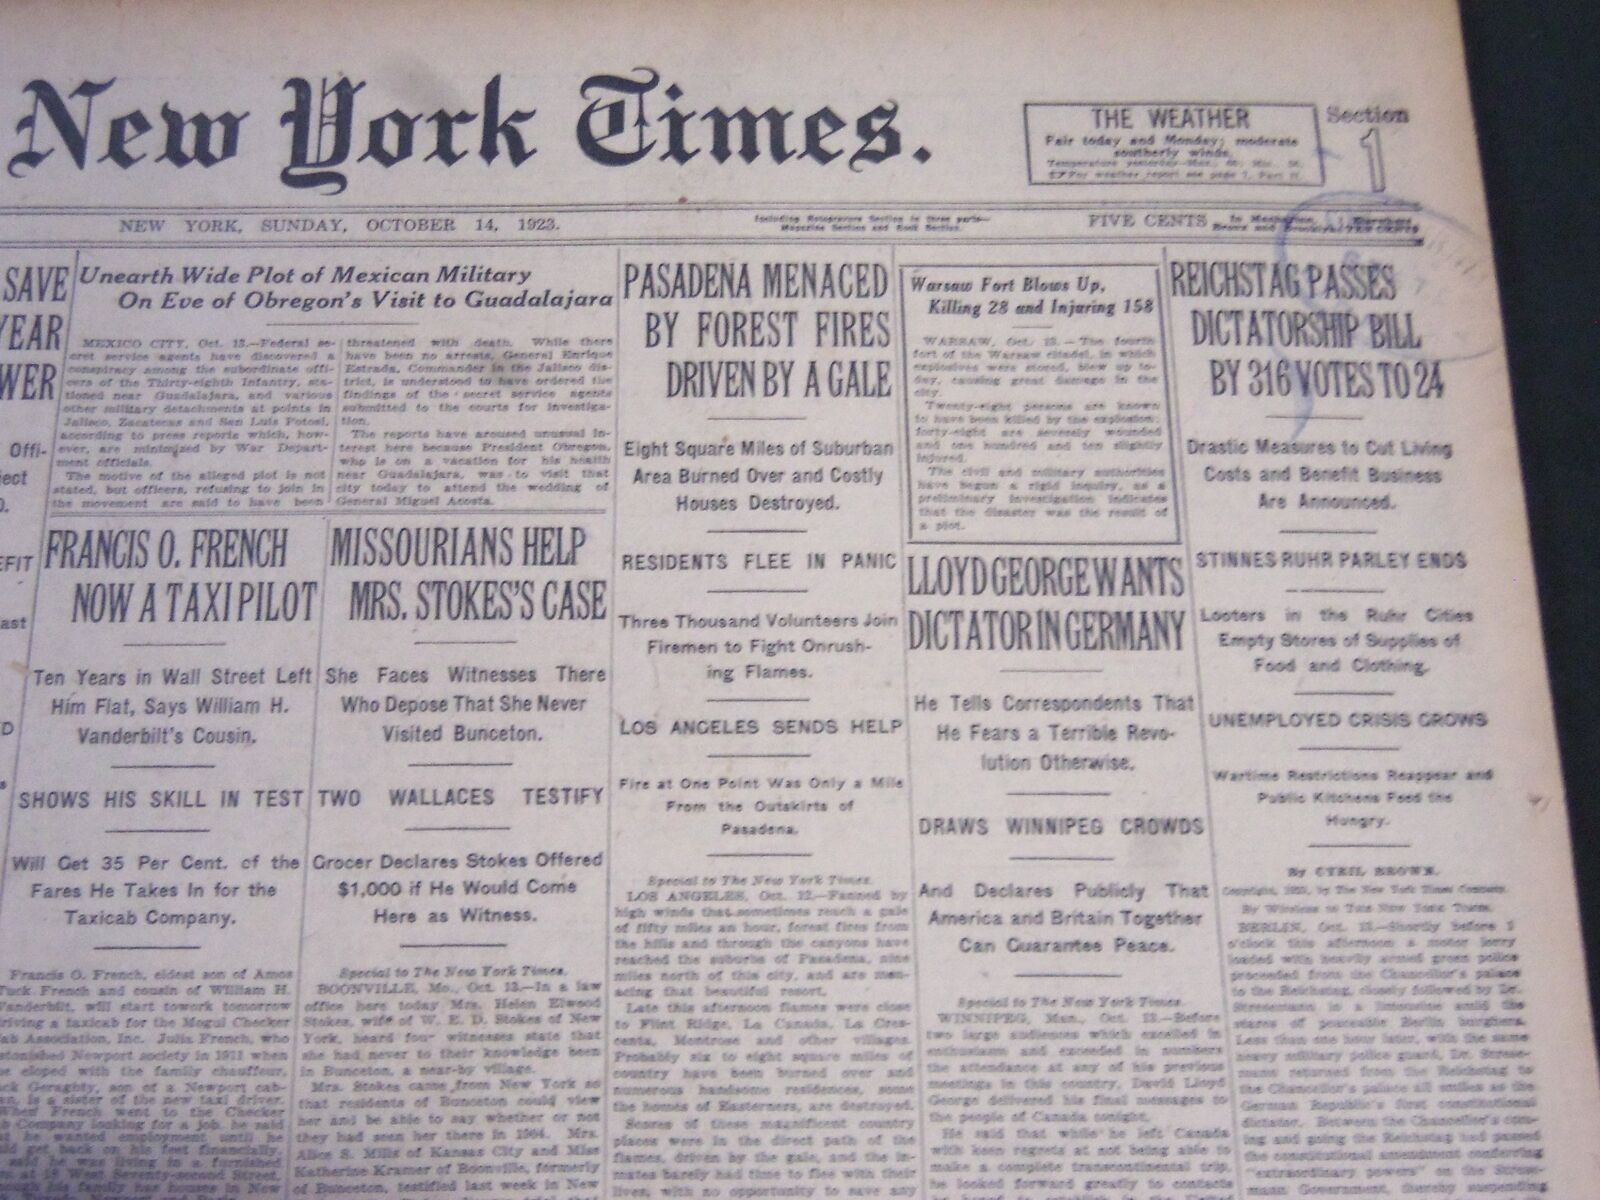 1923 OCTOBER 14 NEW YORK TIMES - REICHSTAG PASSES DICTATORSHIP BILL - NT 5864